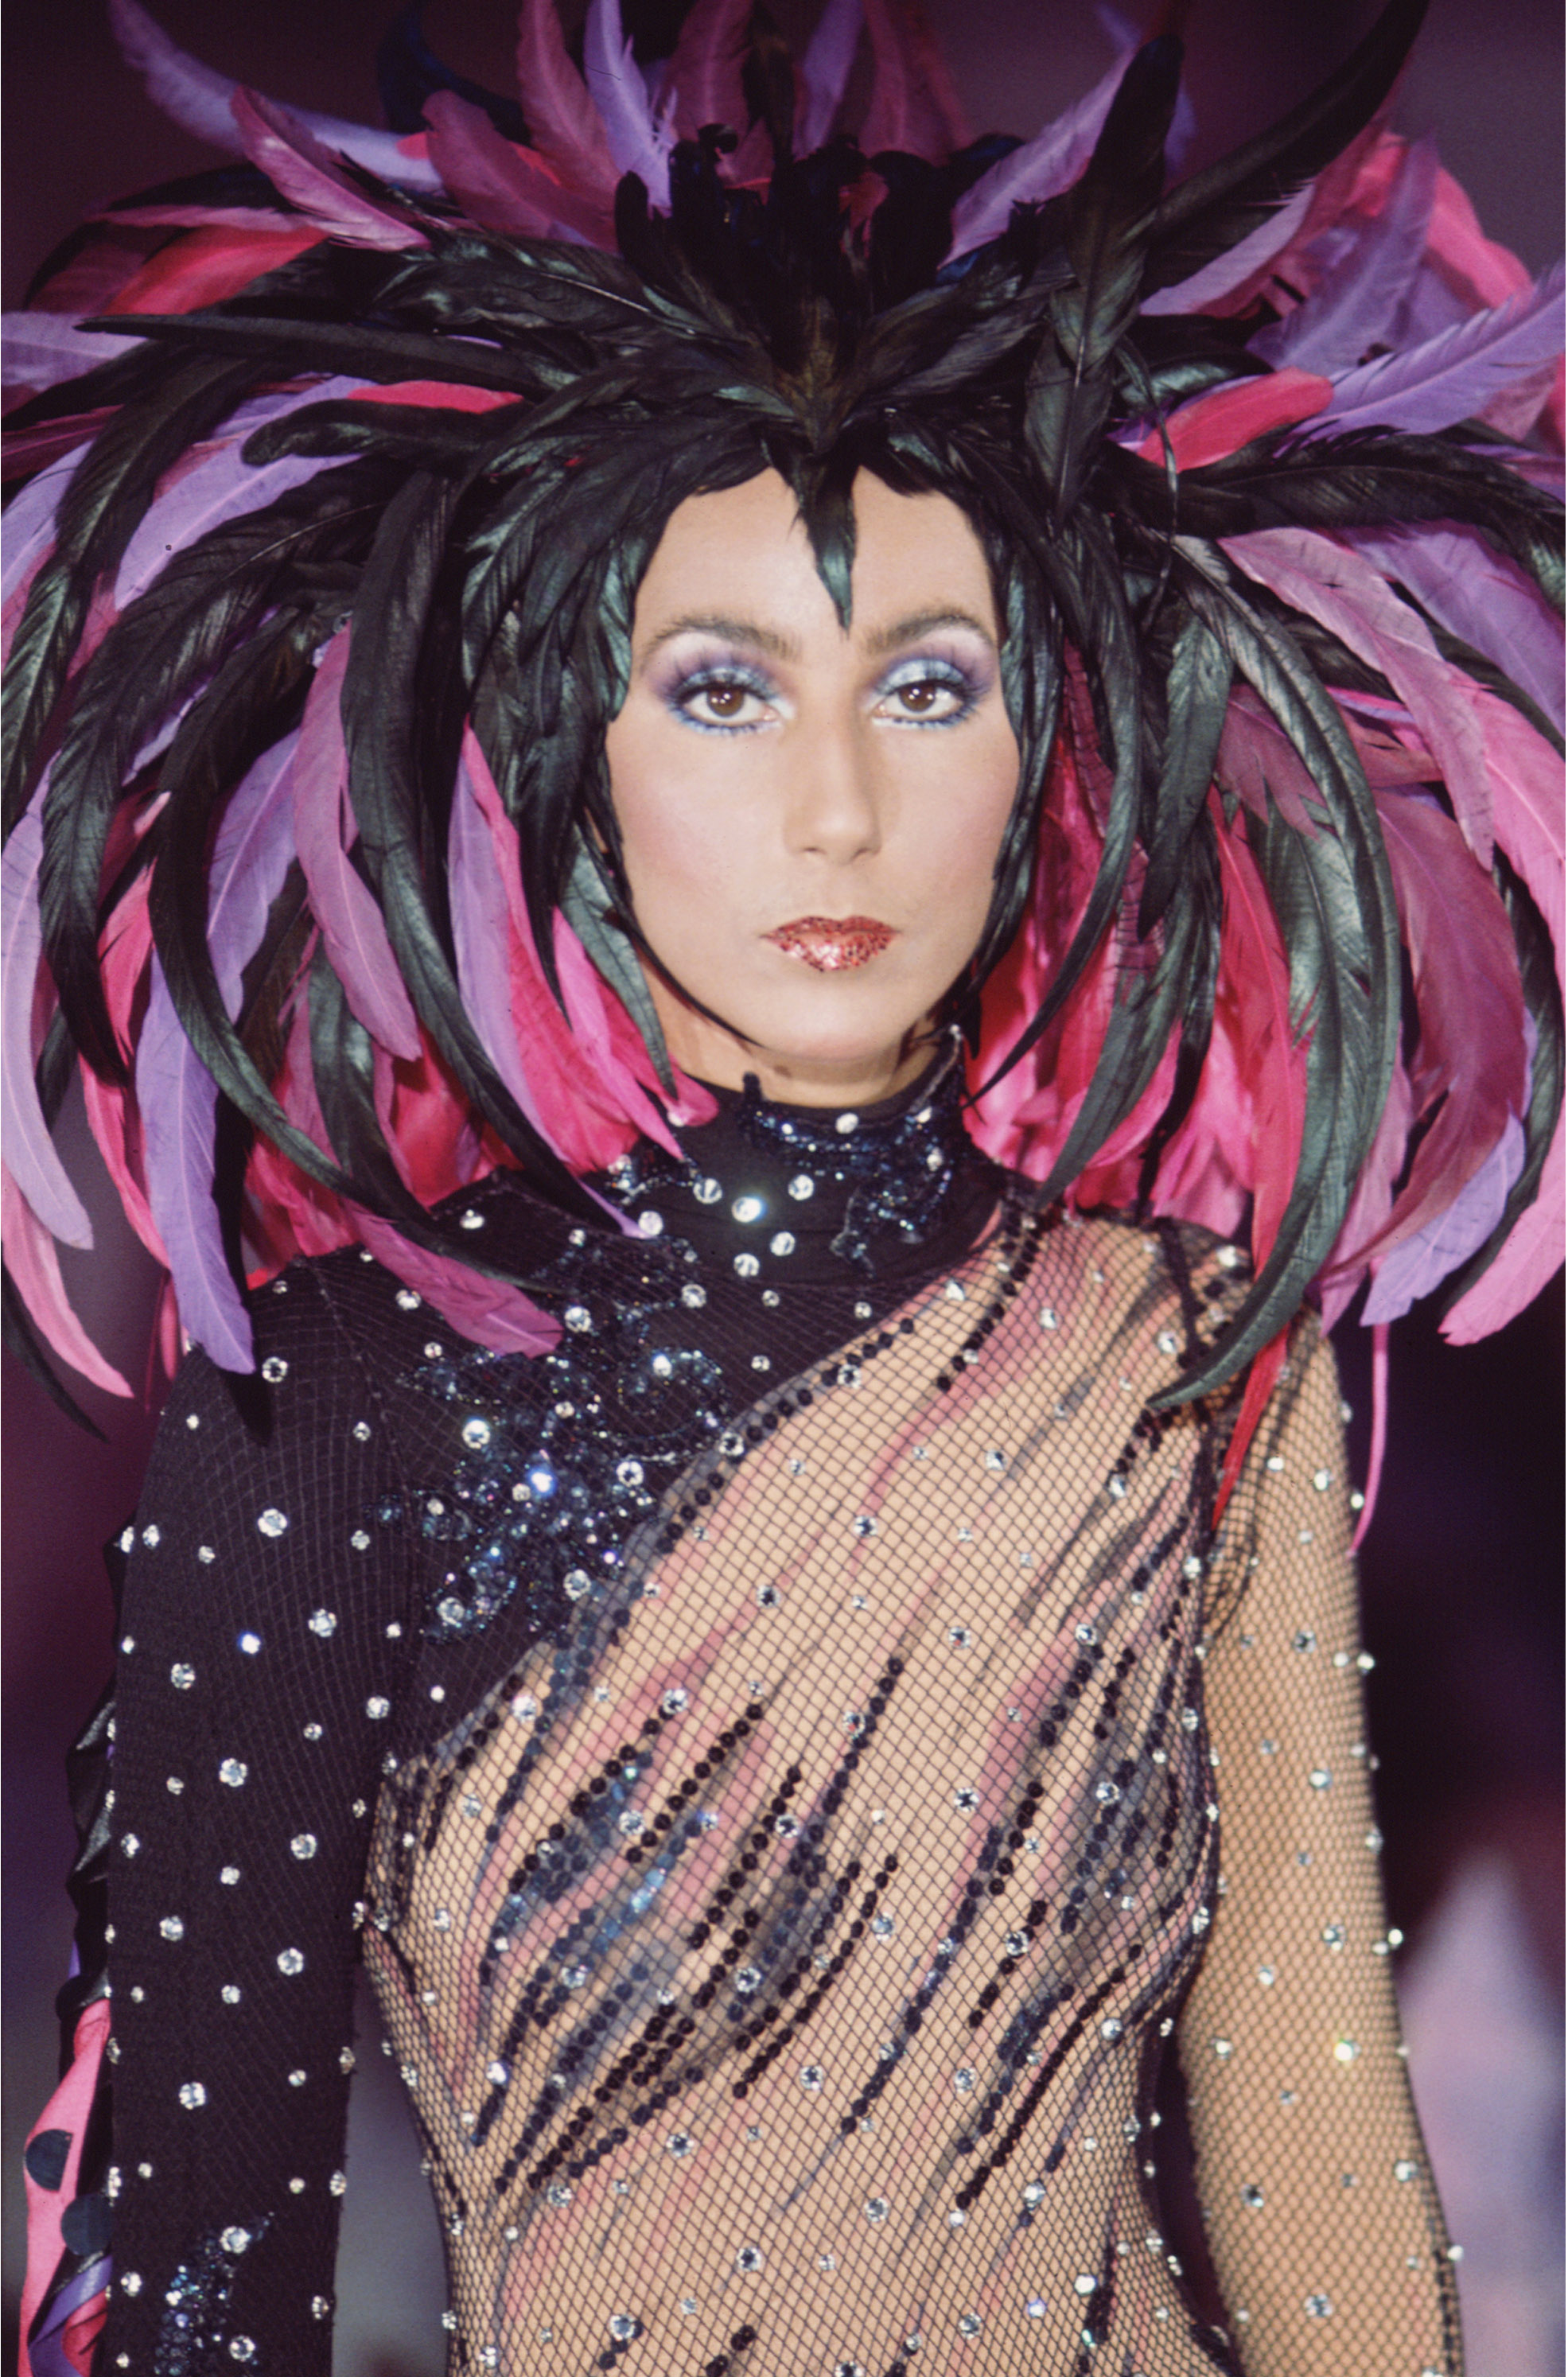 Promotional portrait of American singer and actress Cher (born Cherilyn Sarkisian LaPiere) in a semi-transparent outfit with a feathered headdress for the television variety show 'The Sonny and Cher Comedy Hour,' 1972. (Photo by CBS Photo Archive/Getty Images)